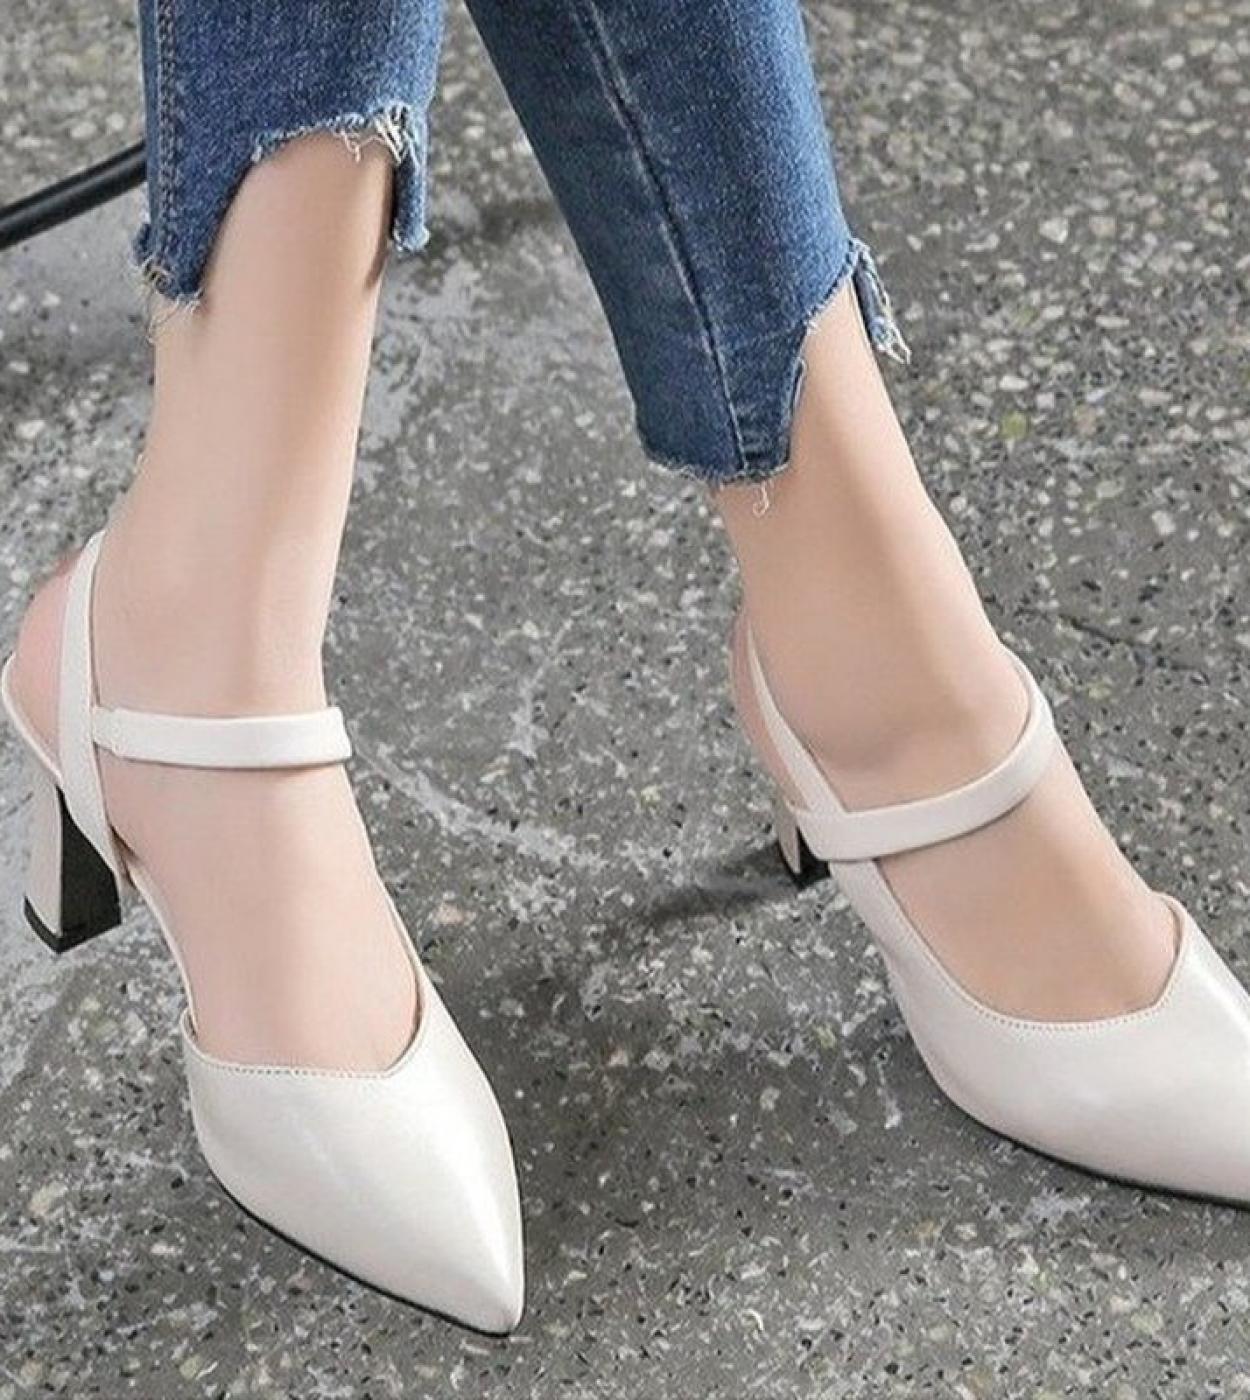 Leather Sandals Womens Mid Heels Summer Wild Chunky Heels Anklestrap Pumps Closed Toe Back Empty Fashion Sandals Women 